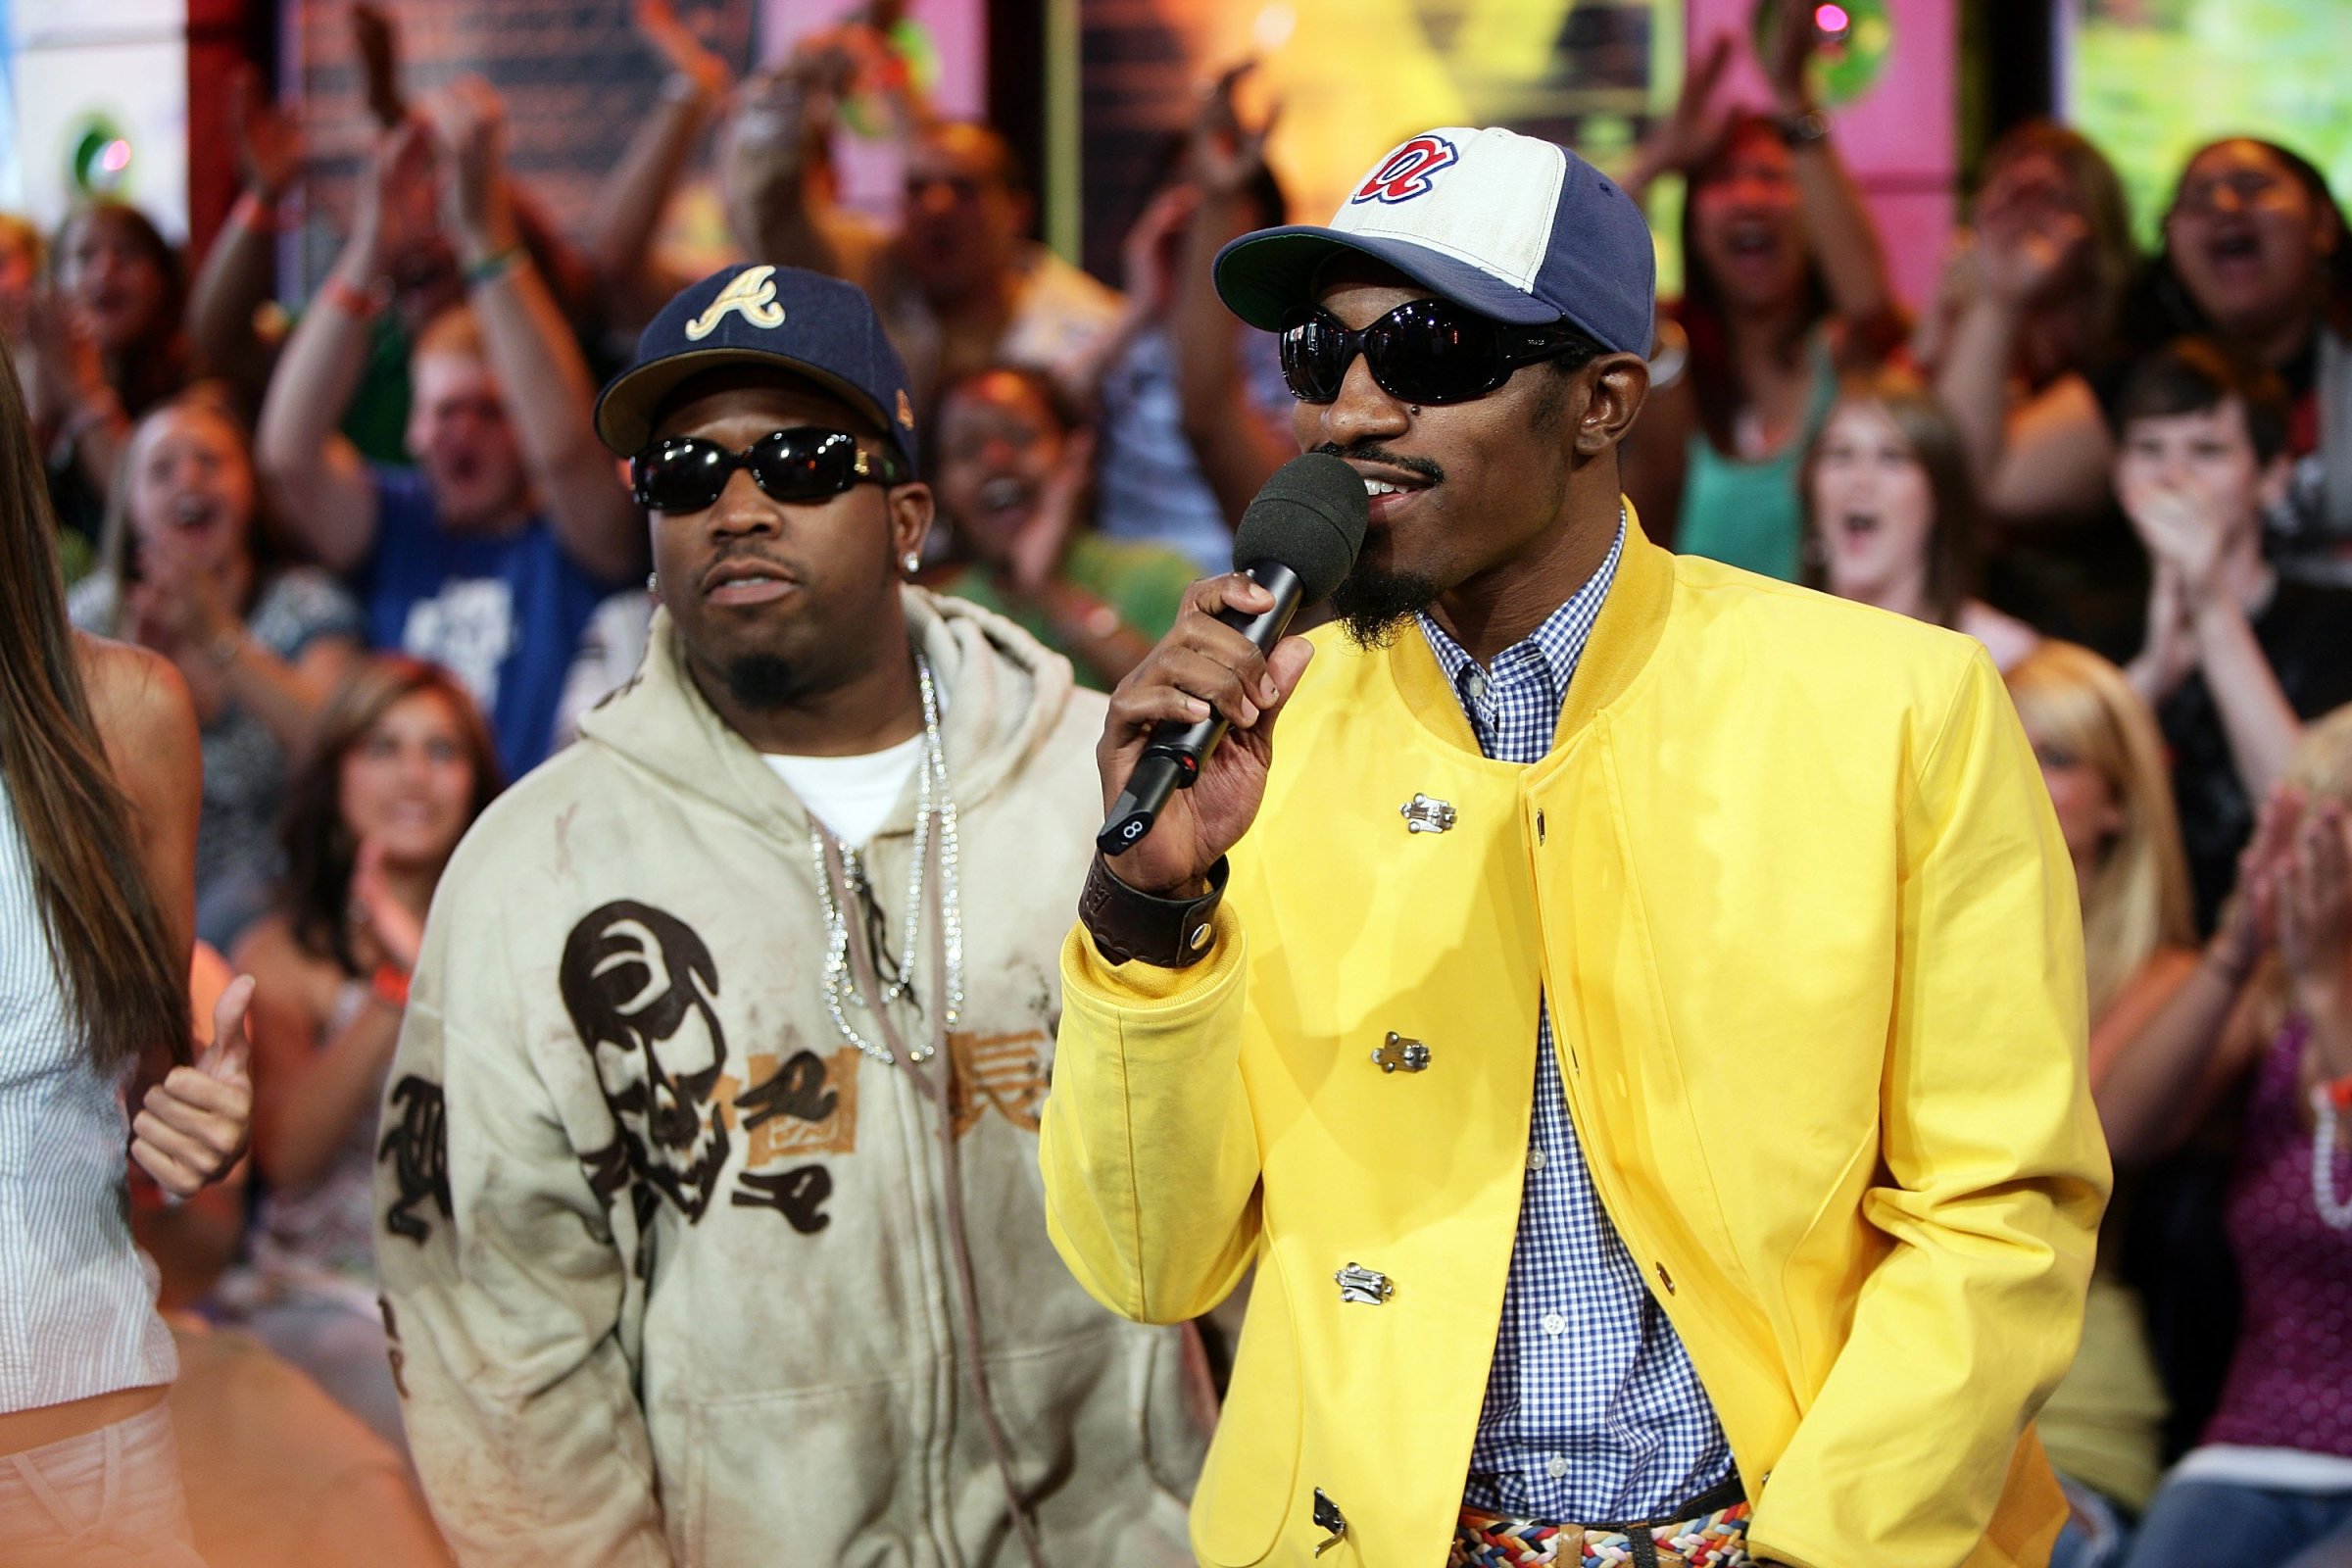 From left: Antwan A. (Big Boi) Patton and Andre (Andre 3000) Benjamin of Outkast onstage during MTV's Total Request Live at the MTV Times Square Studios on Aug. 22, 2006 in New York City.